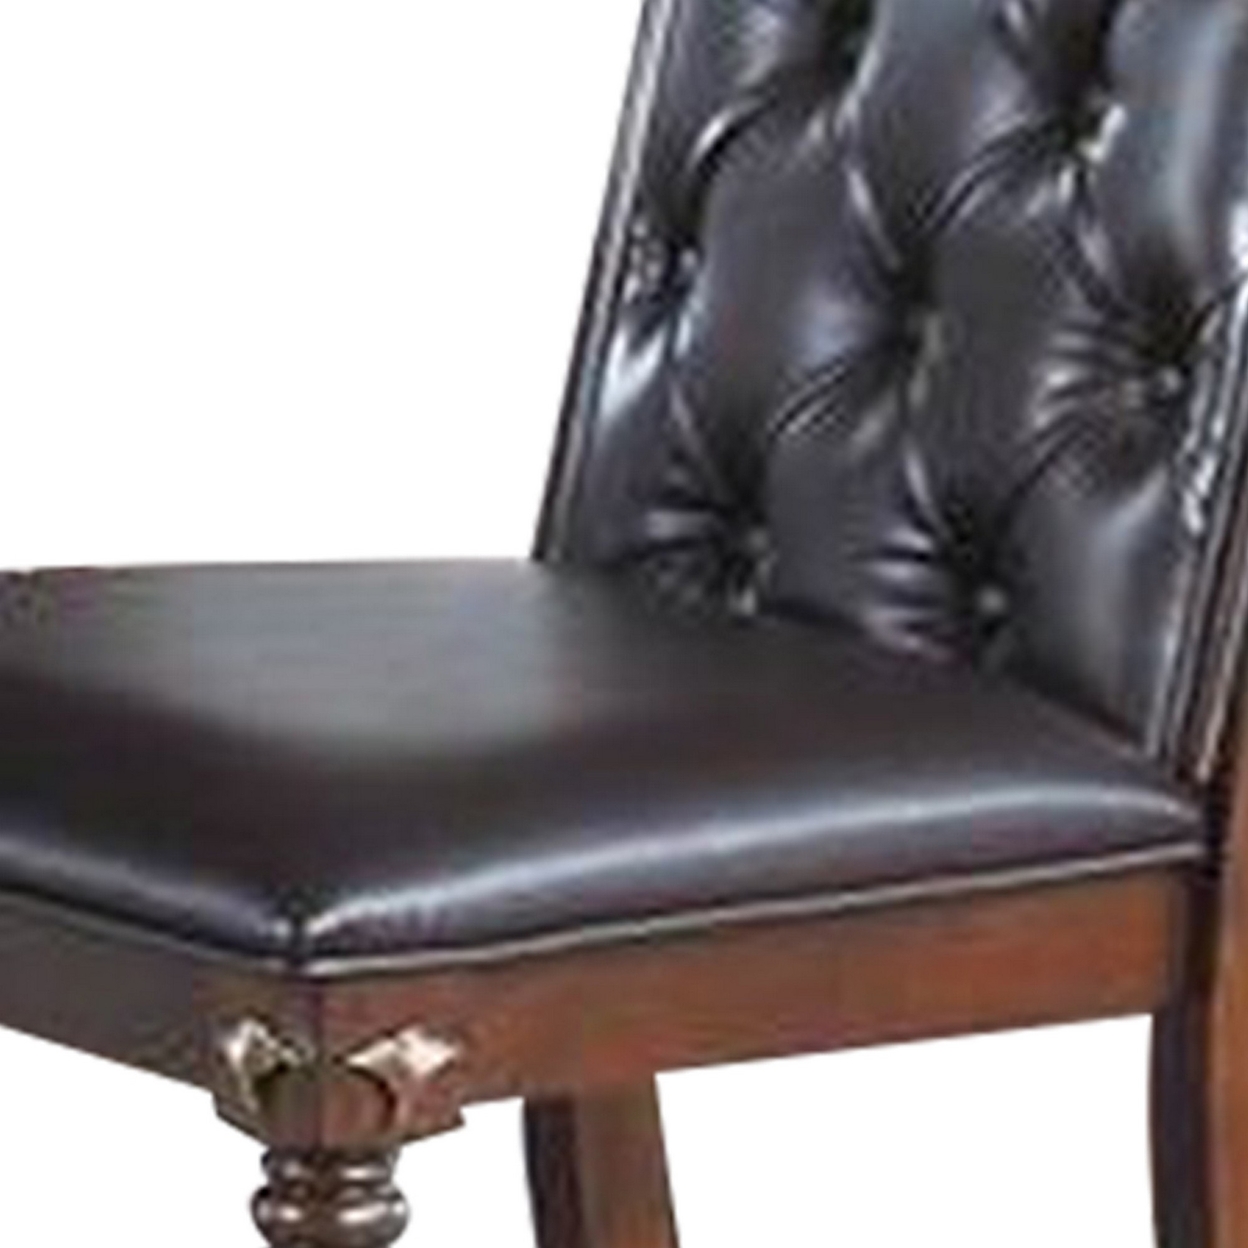 Kipp 25 Inch Set Of 2 Armless Dining Chairs, Brown Wood, Black Faux Leather